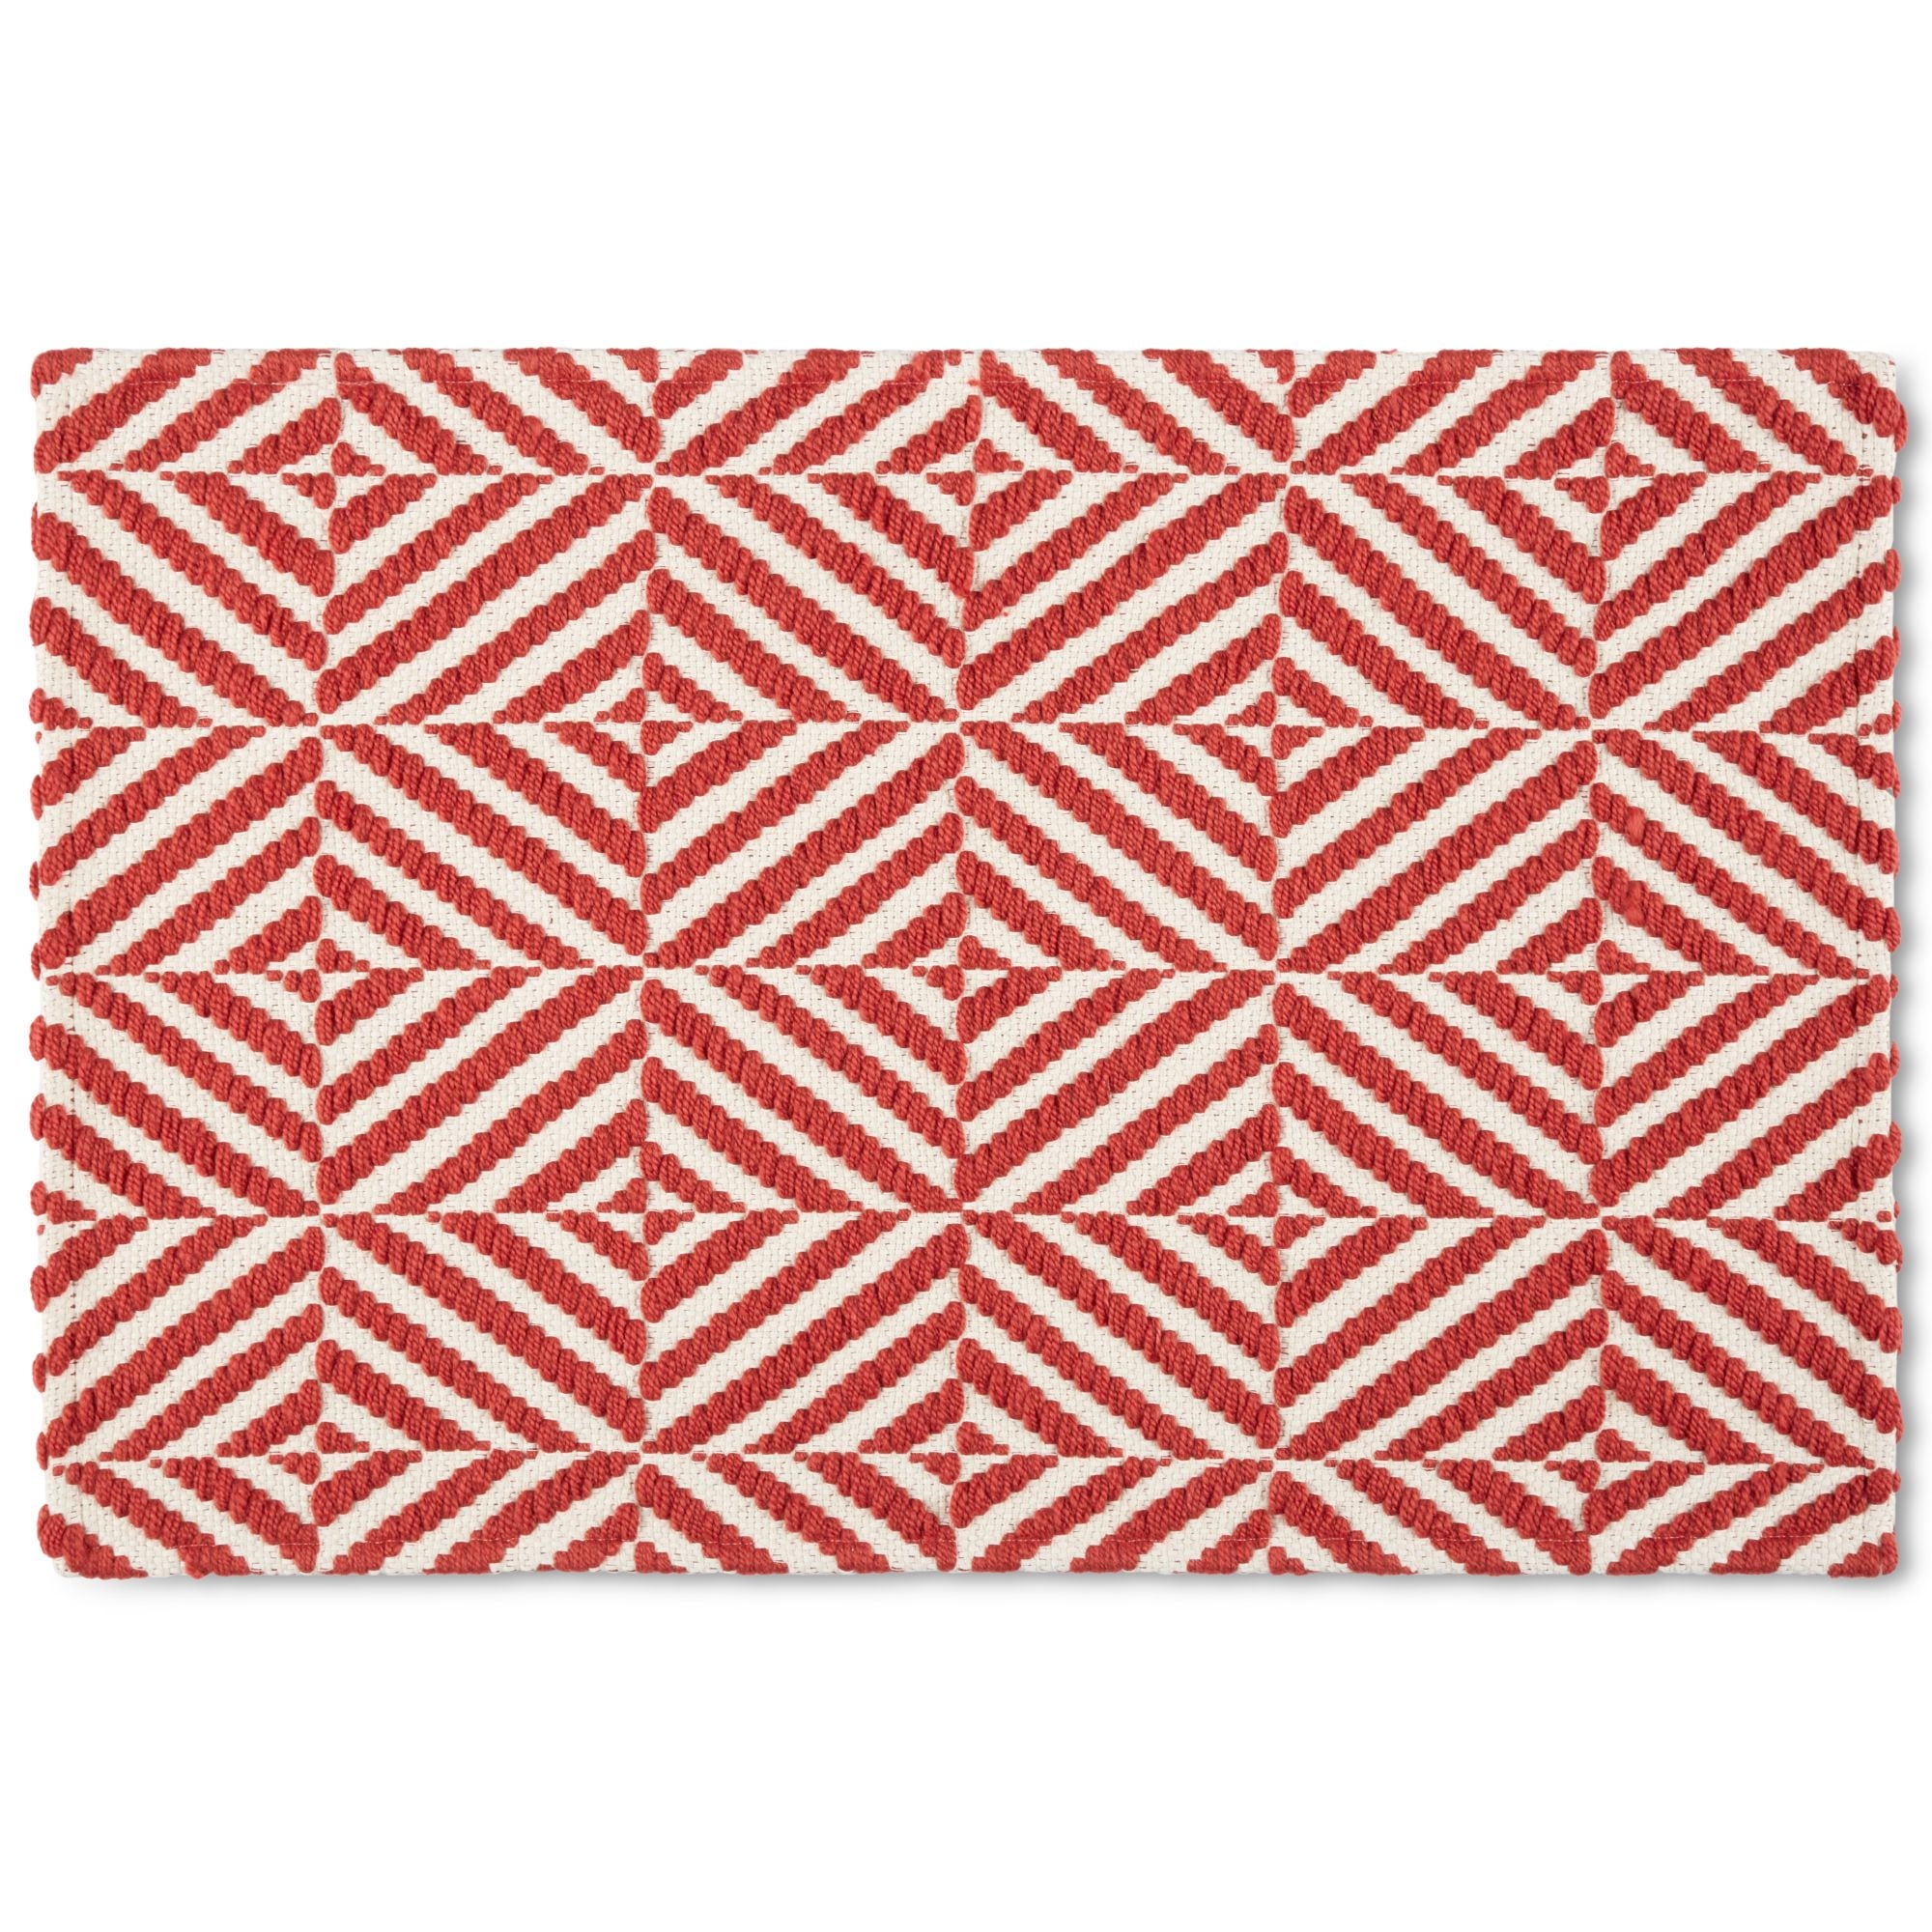 Mainstays Montana Woven Fabric Mat, 18"x27", Red, Available in Multiple Colors